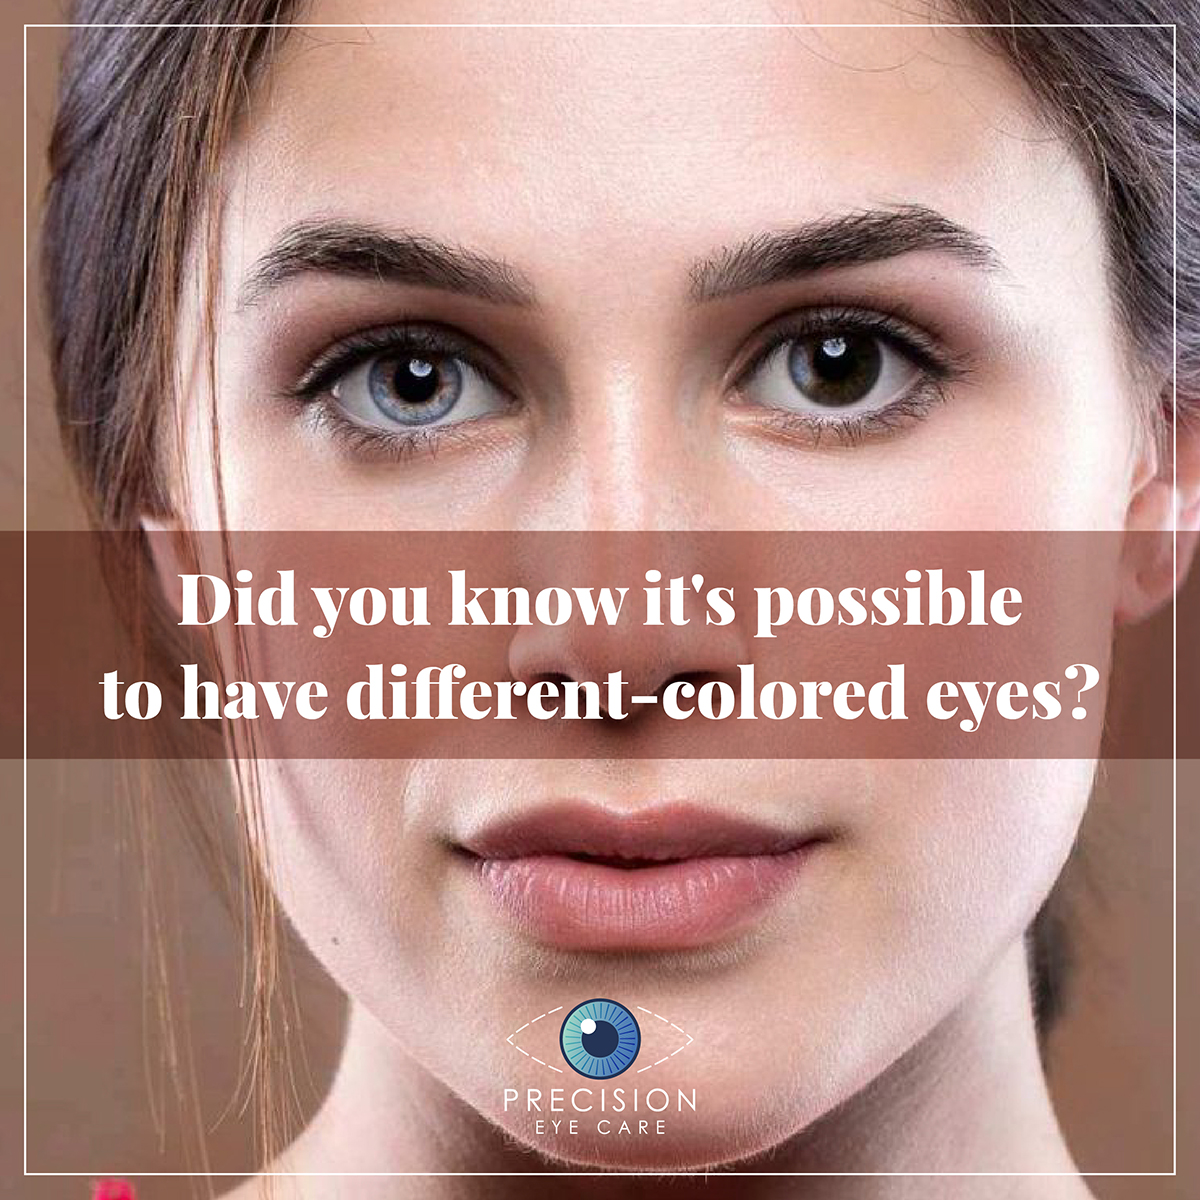 Heterochromia: Why Are My Eyes Different Colors? 